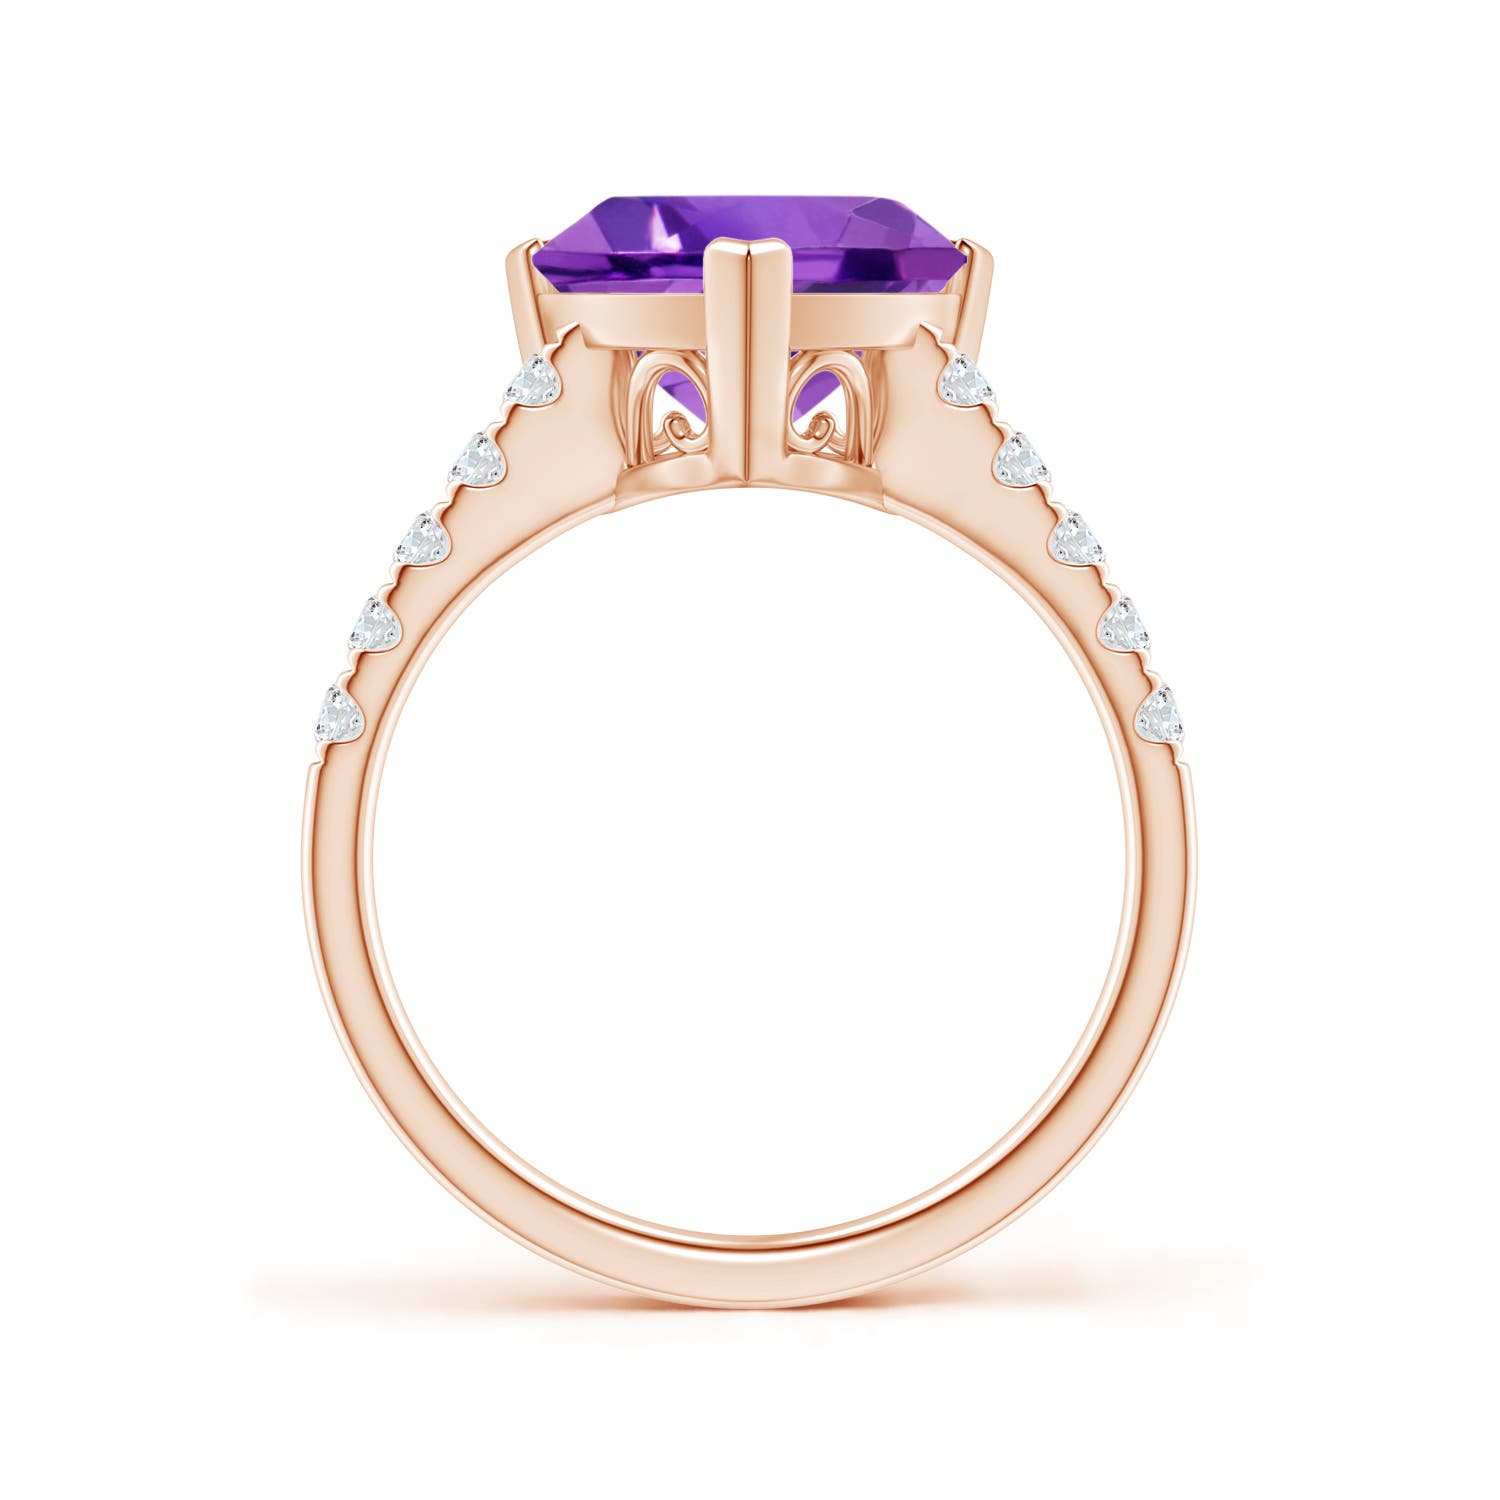 AAA - Amethyst / 2.95 CT / 14 KT Rose Gold